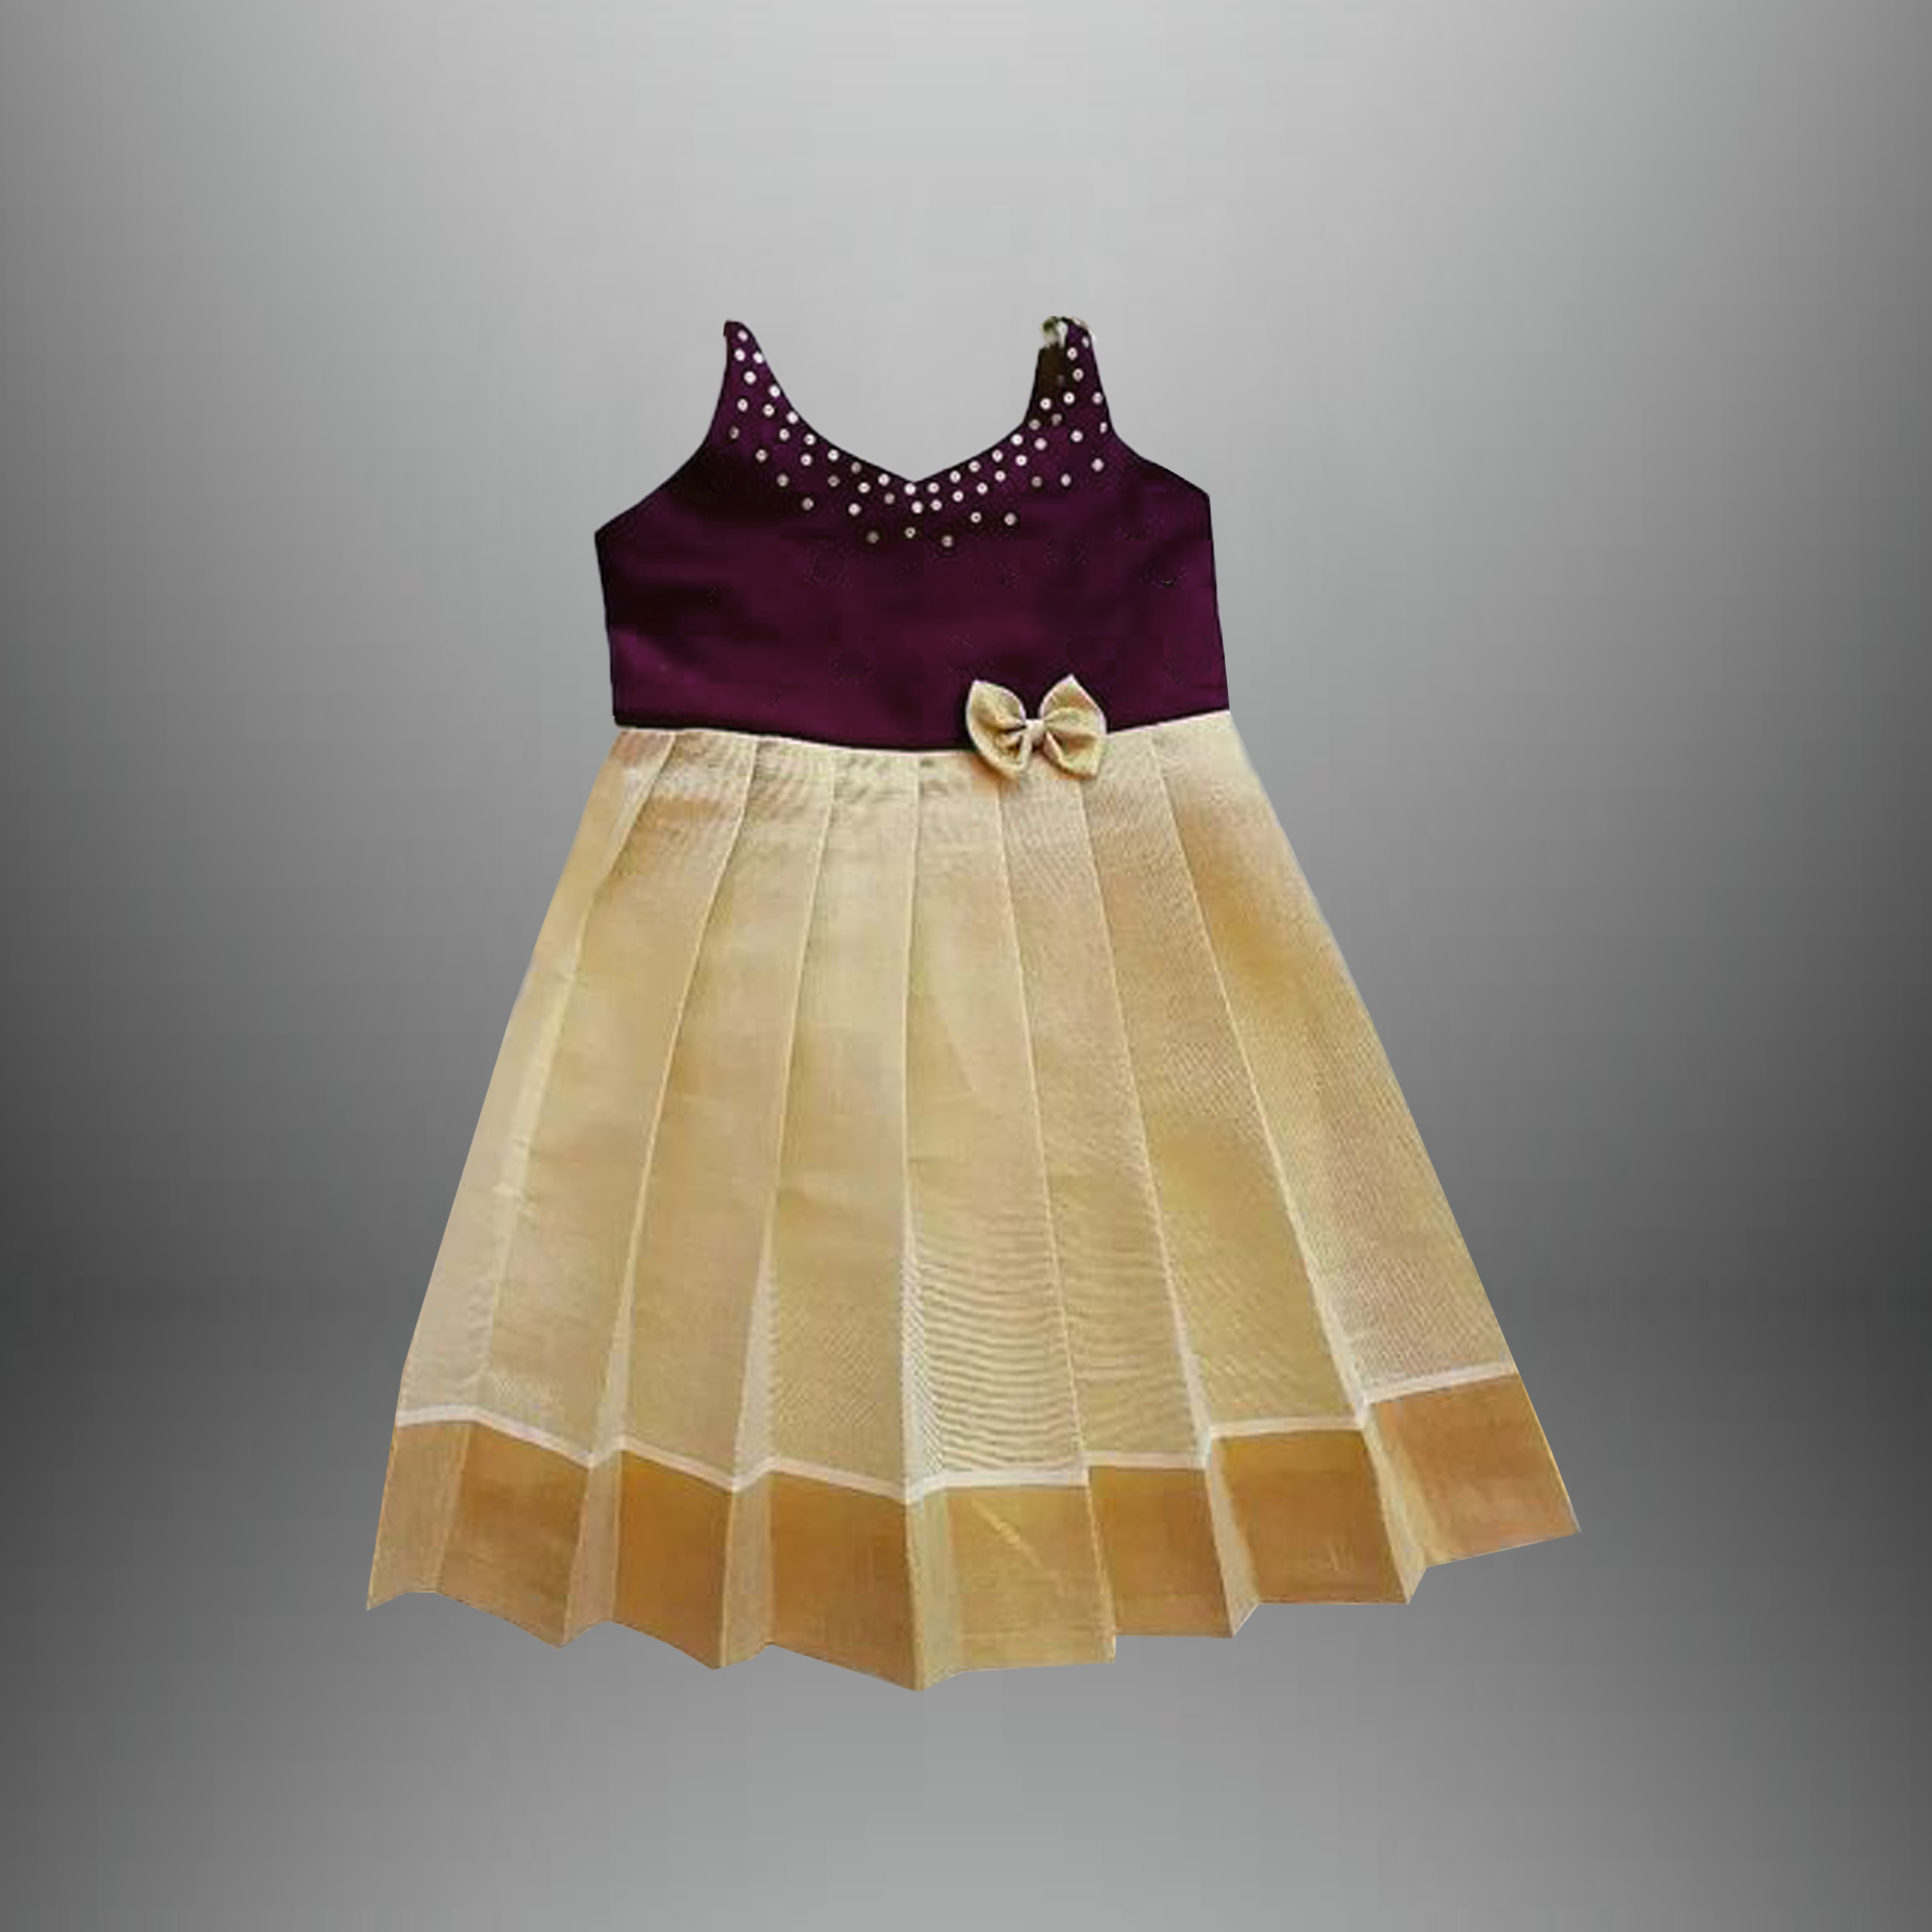 Girl's Two colored dress with pearl embellishment-RKFCW432